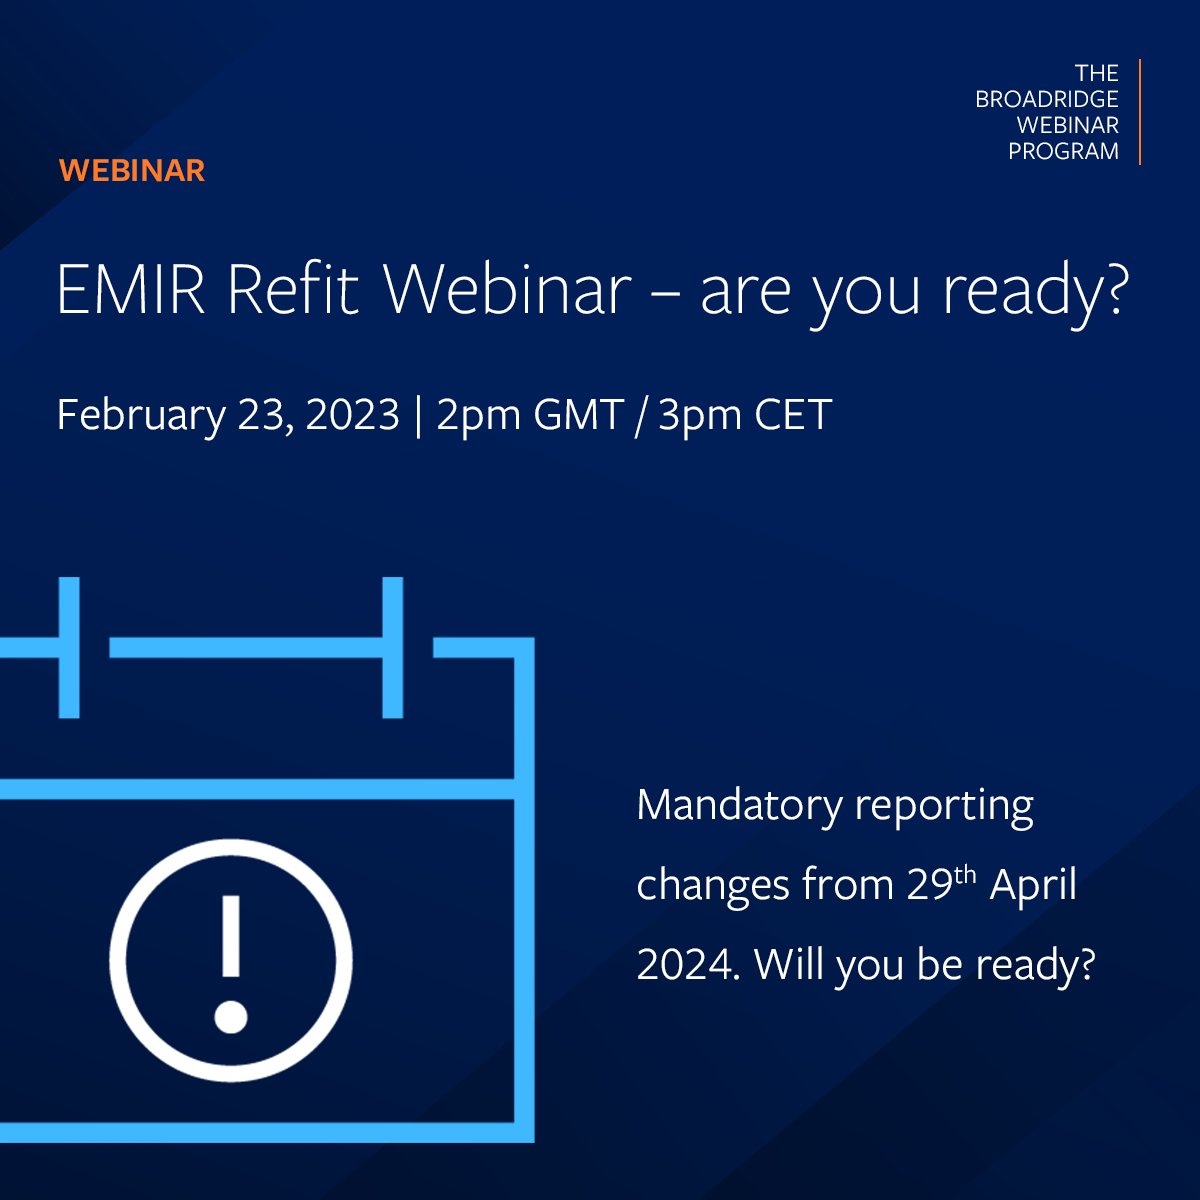 EMIR Refit goes live on 29th April 2024 and requires a significant change to the reportable fields and other important changes. Register for this webinar now to learn how you can future-proof your reporting set-up.

#EMIRRefit   bit.ly/3lZJbJm